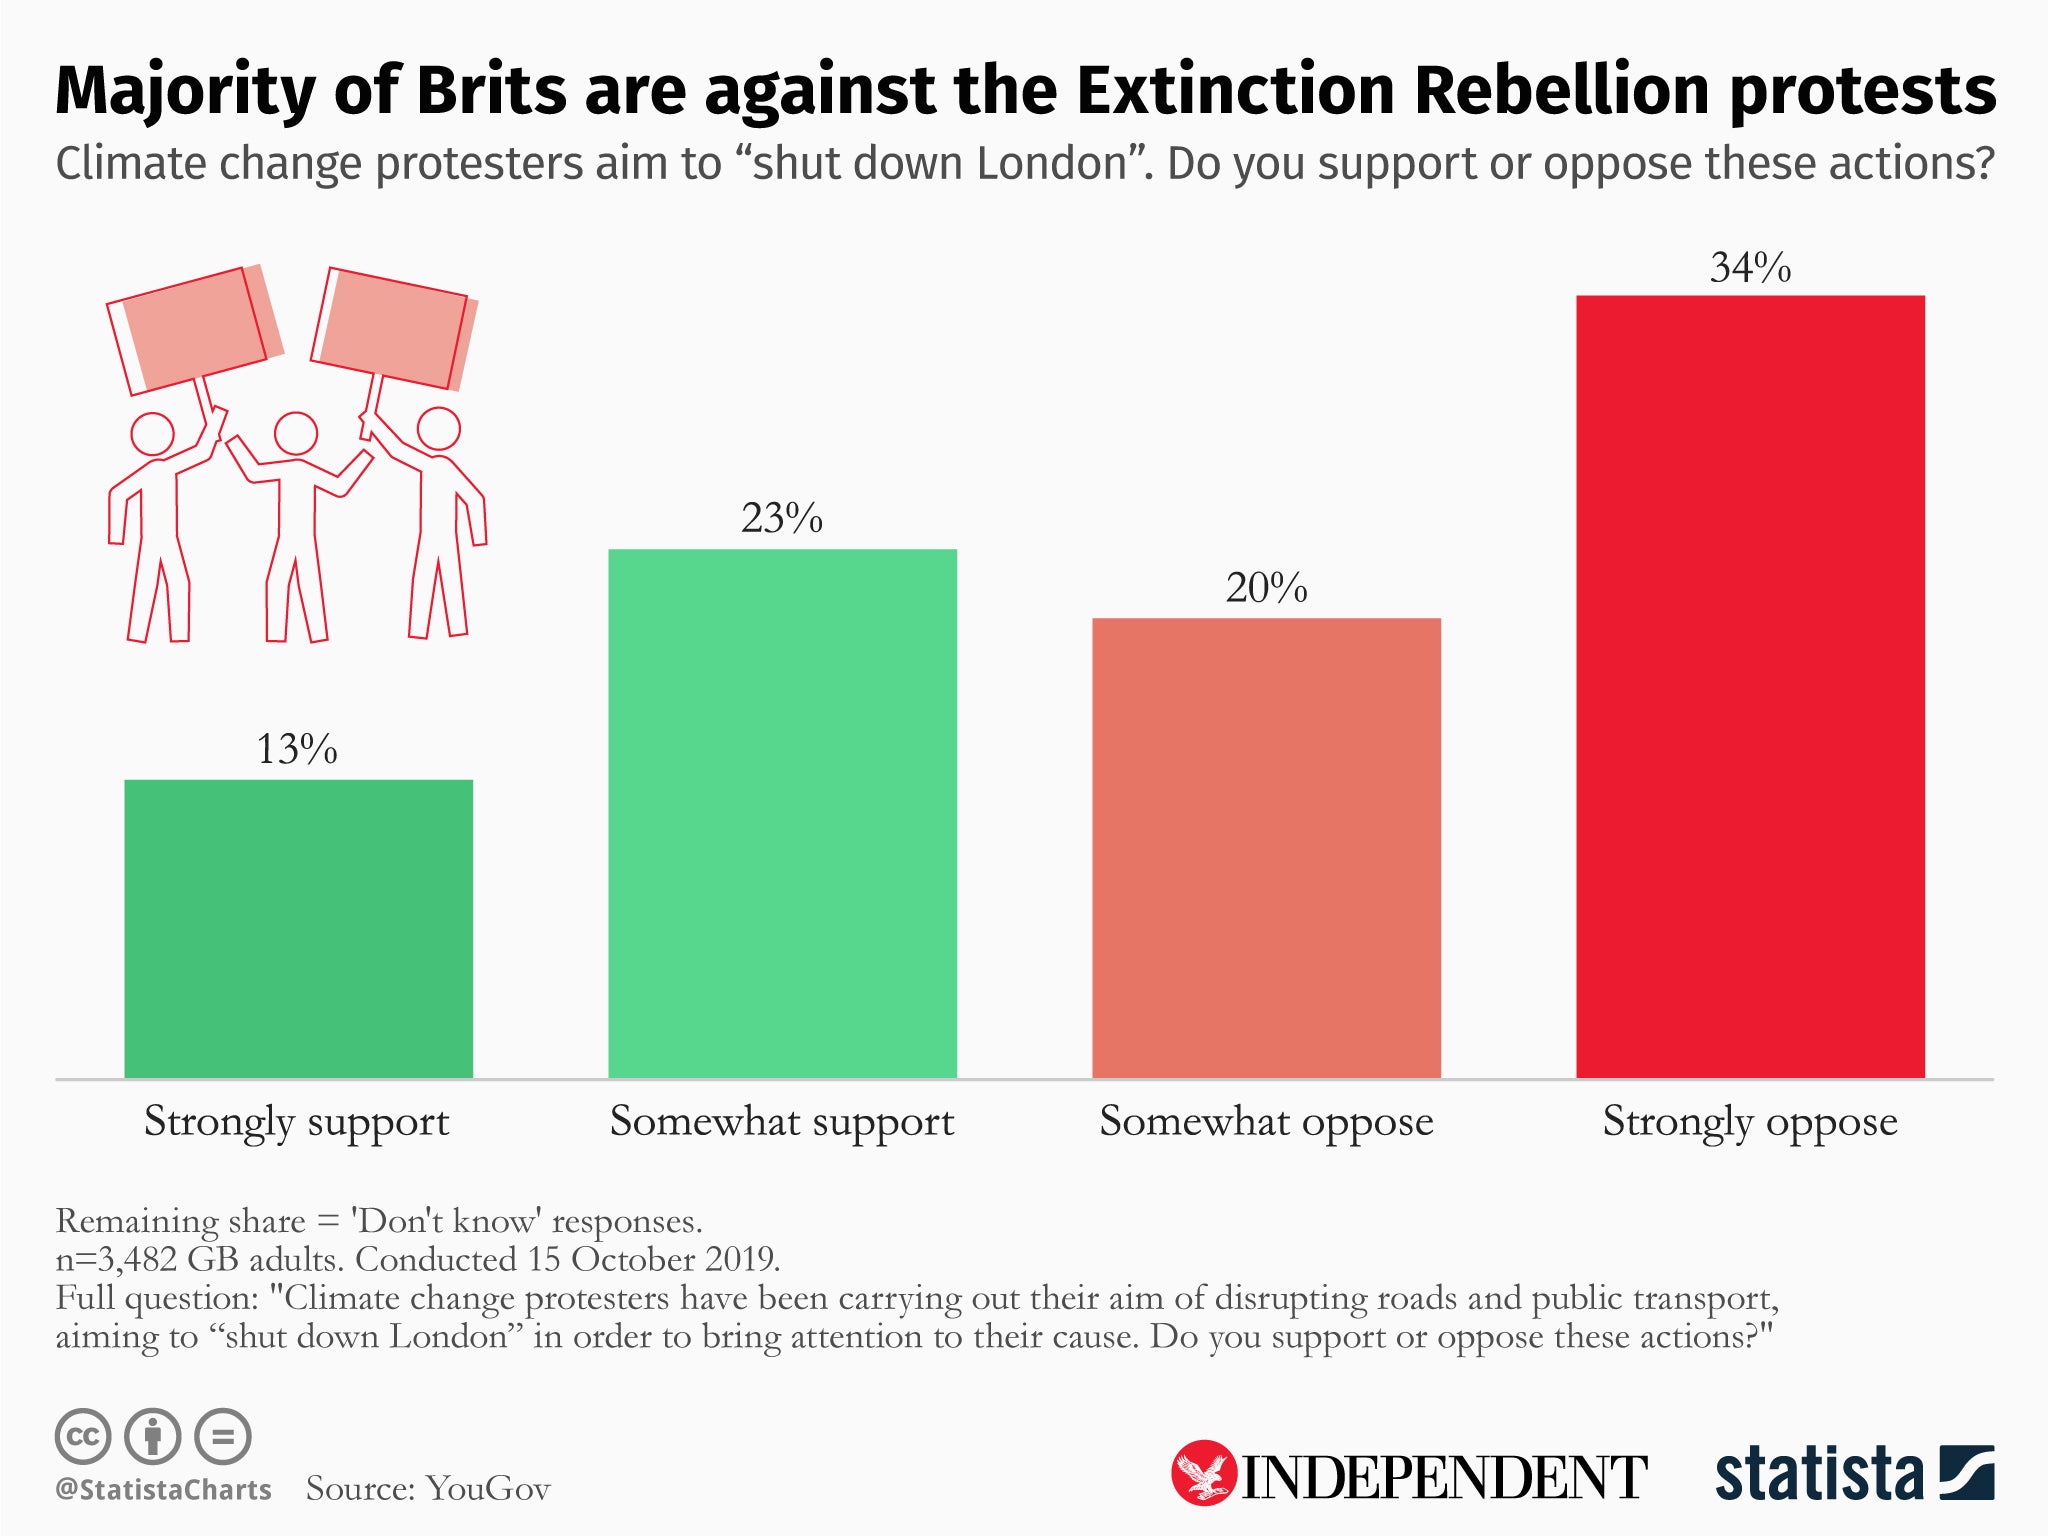 More than one-third of Britons strongly oppose the latest XR protests